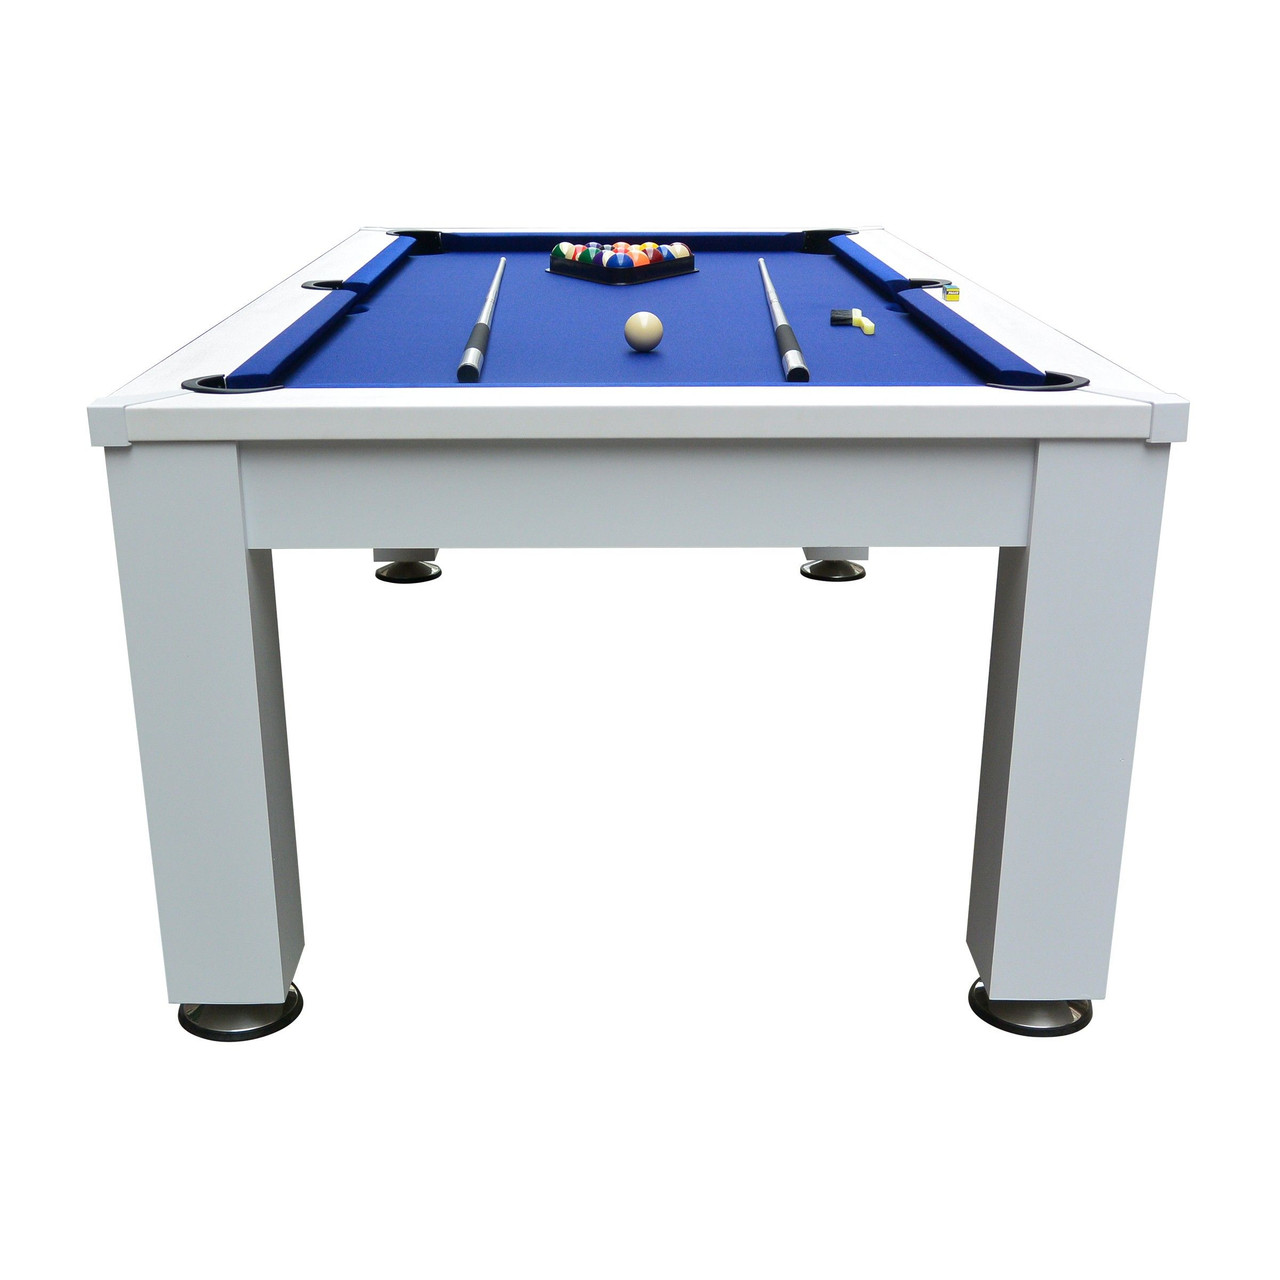  Imperial Esterno, Outdoor, Pool, Table, 0029-731, Billiards, Game, Room, Tables, 720801954127
